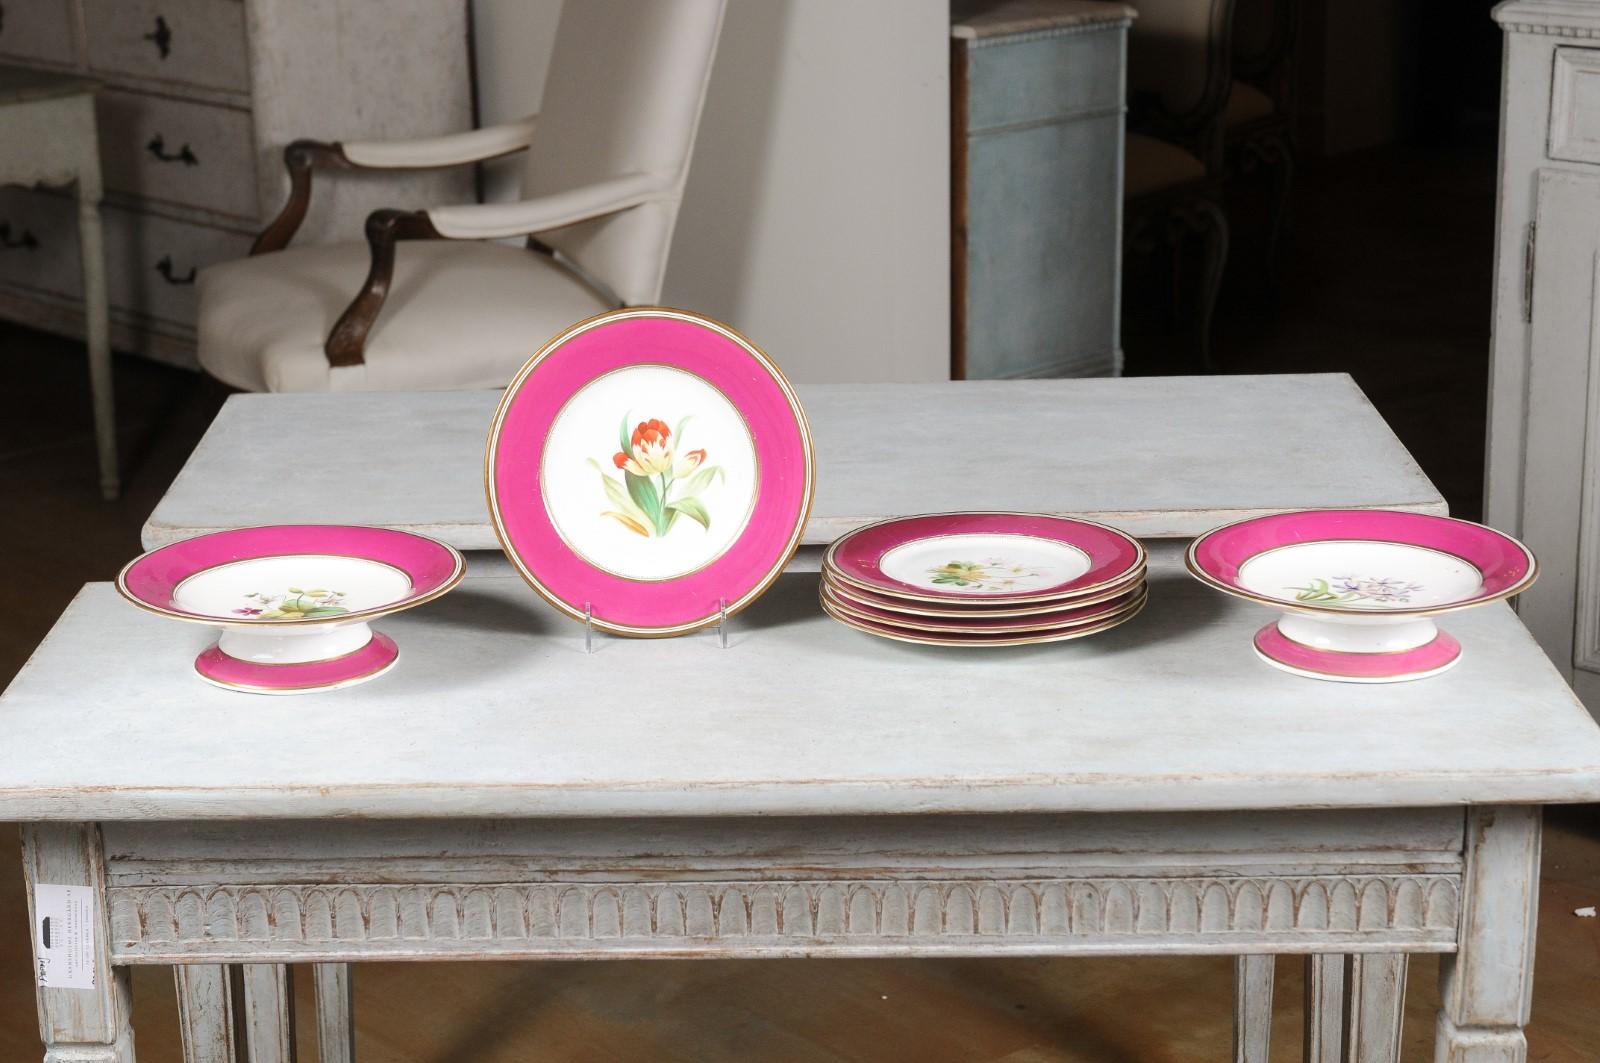 Louis-Philippe period Paris porcelain service plates from the mid-19th century, with fuschia border and floral décor, priced and sold individually. Created in France during the reign of king Louis-Philippe, each plate features a lovely fuschia